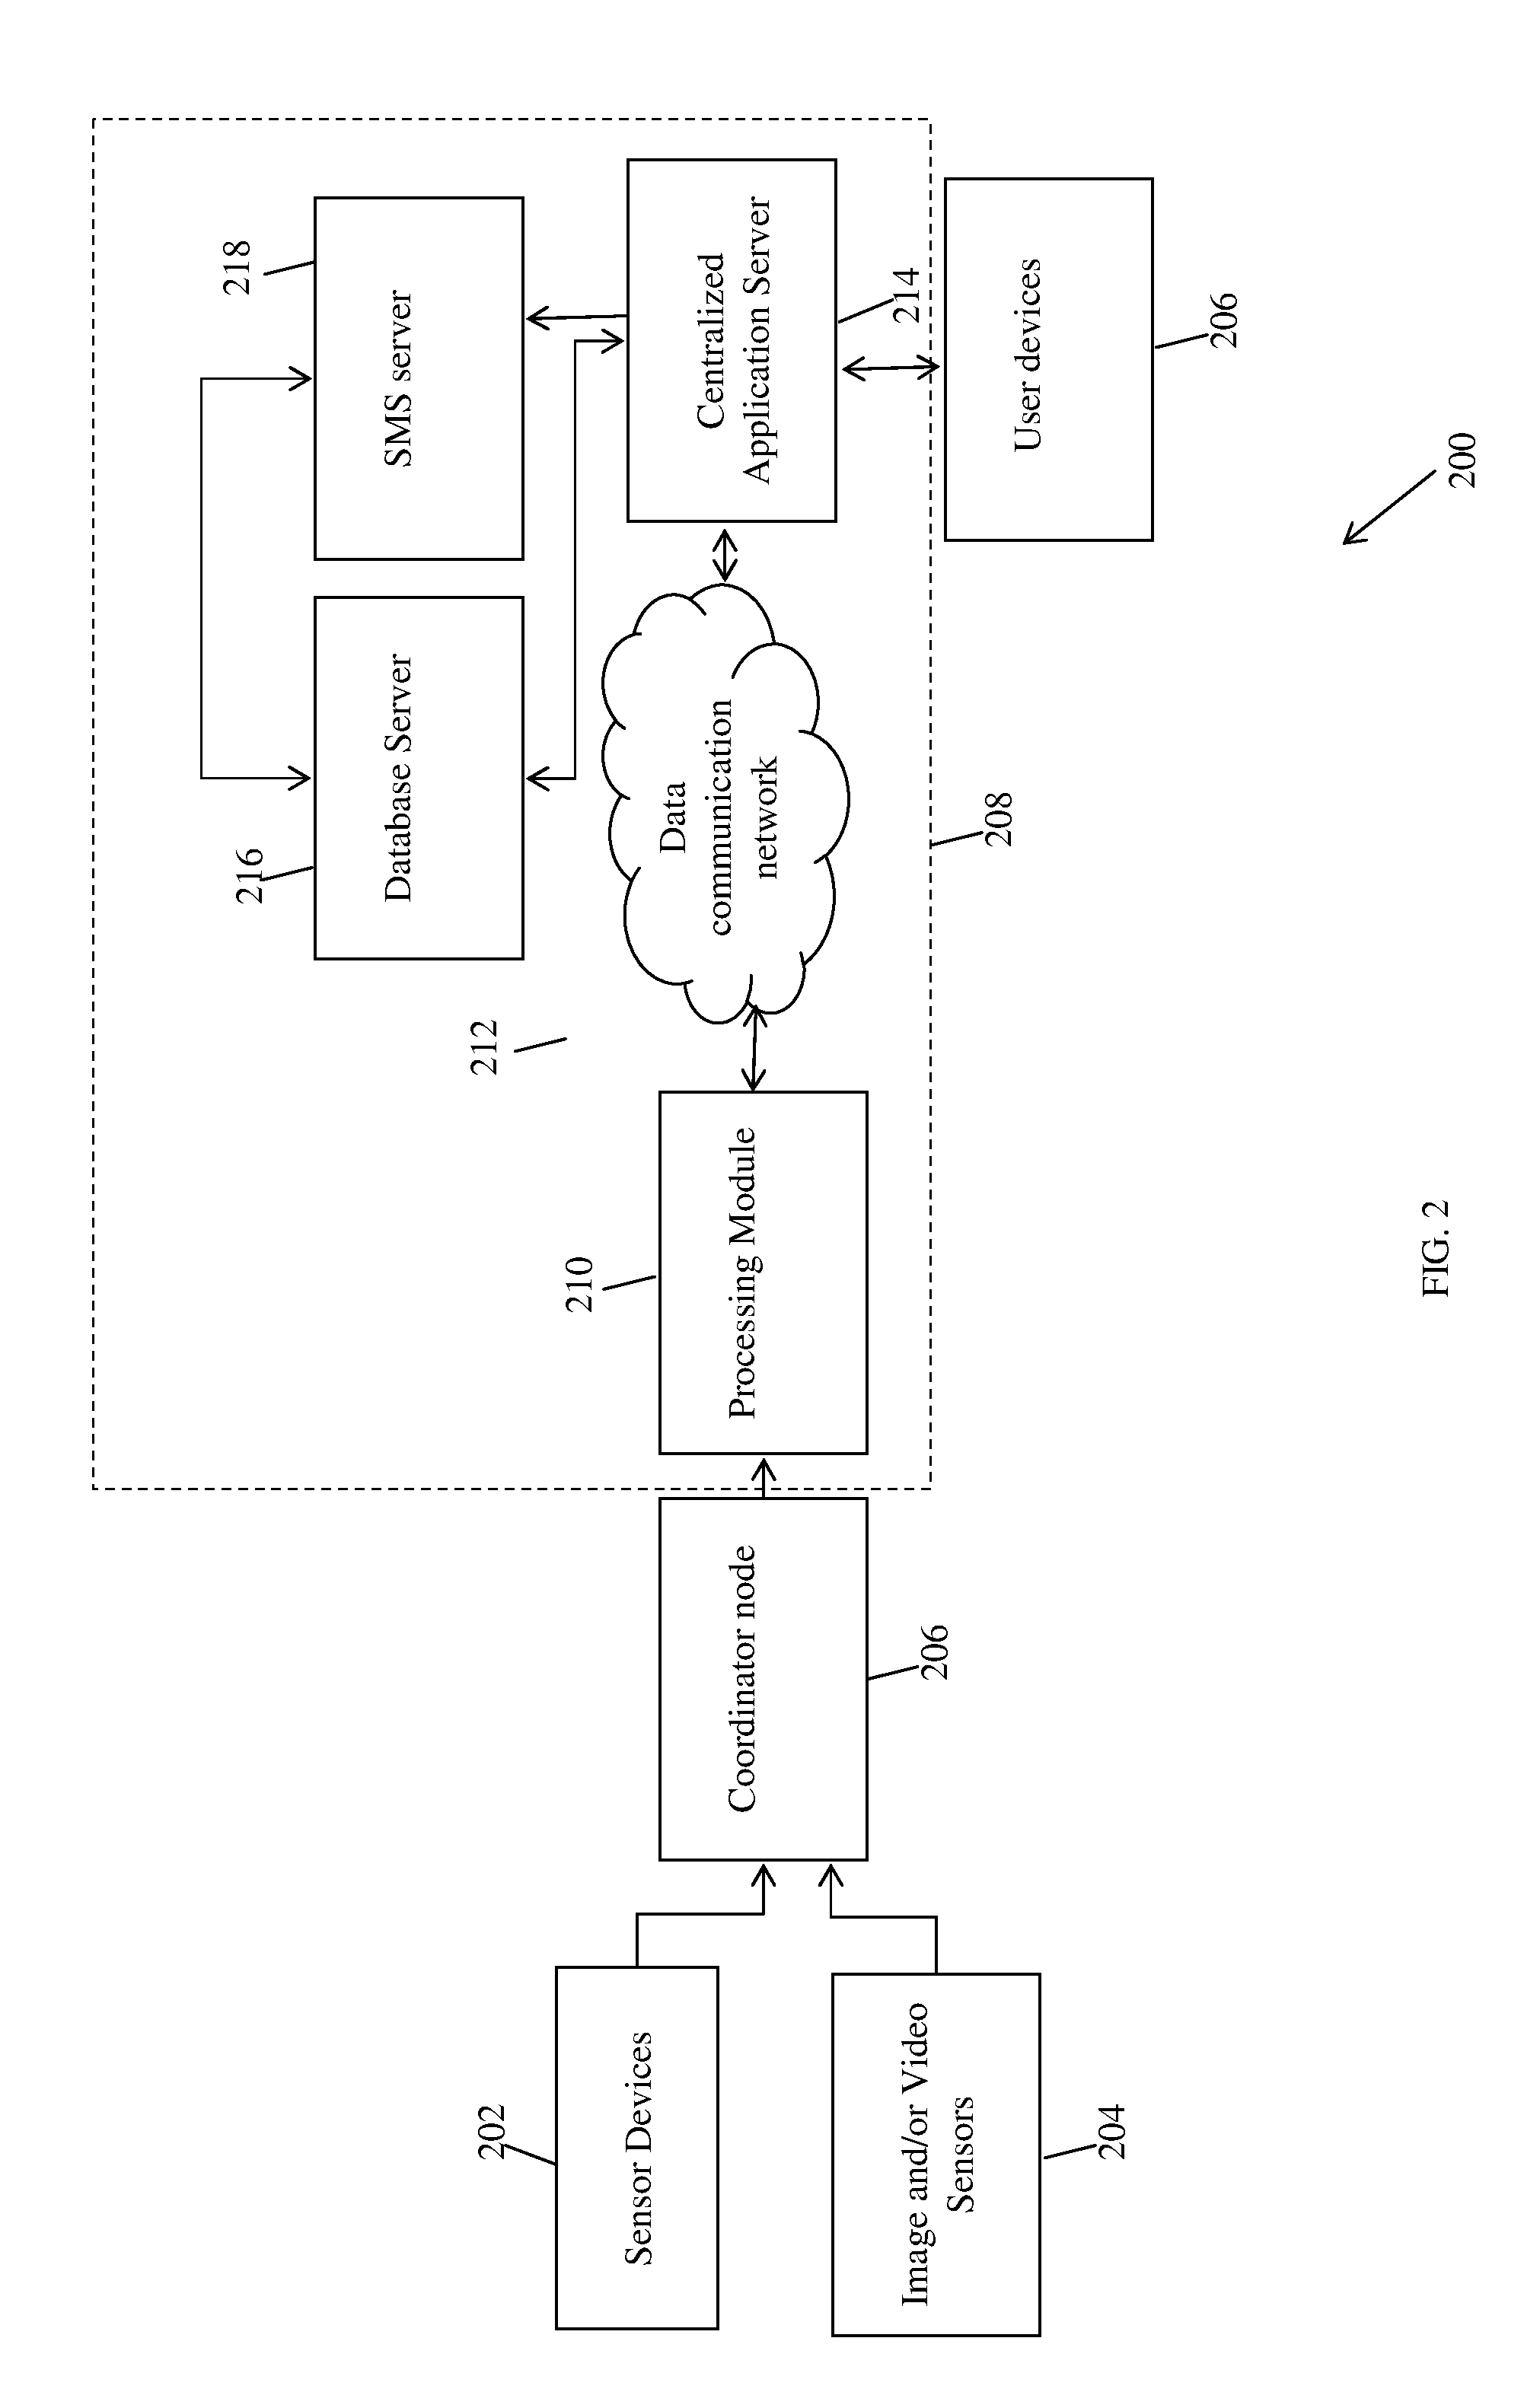 Method and system for real time detection of conference room occupancy